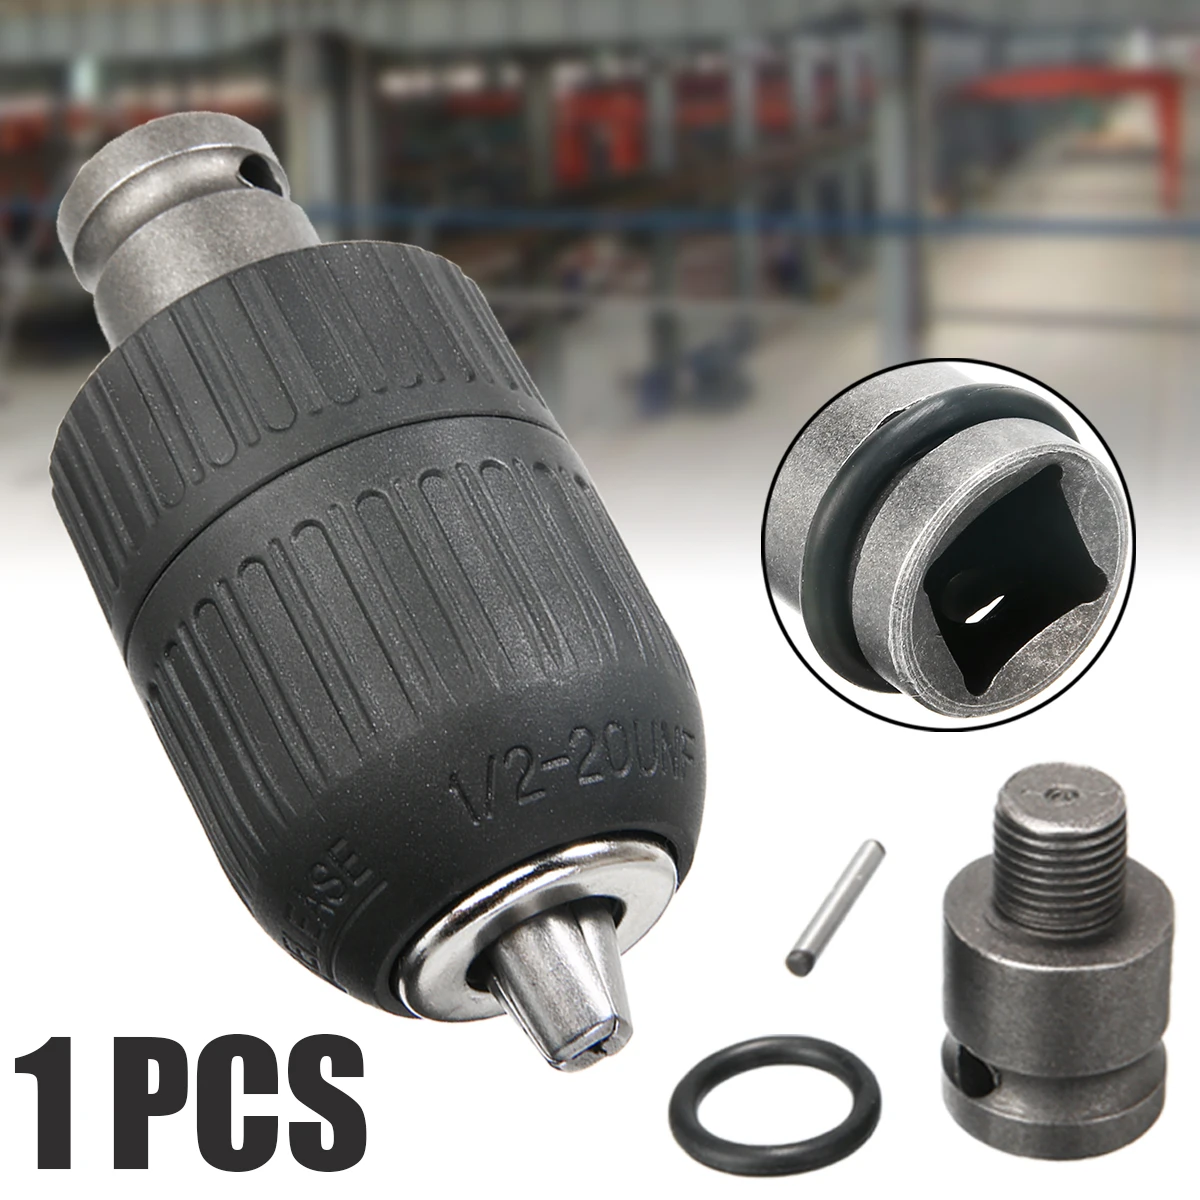 Keyless Bit Hardware Power Tool With Adapter Drill Chuck For Impact Wrench 